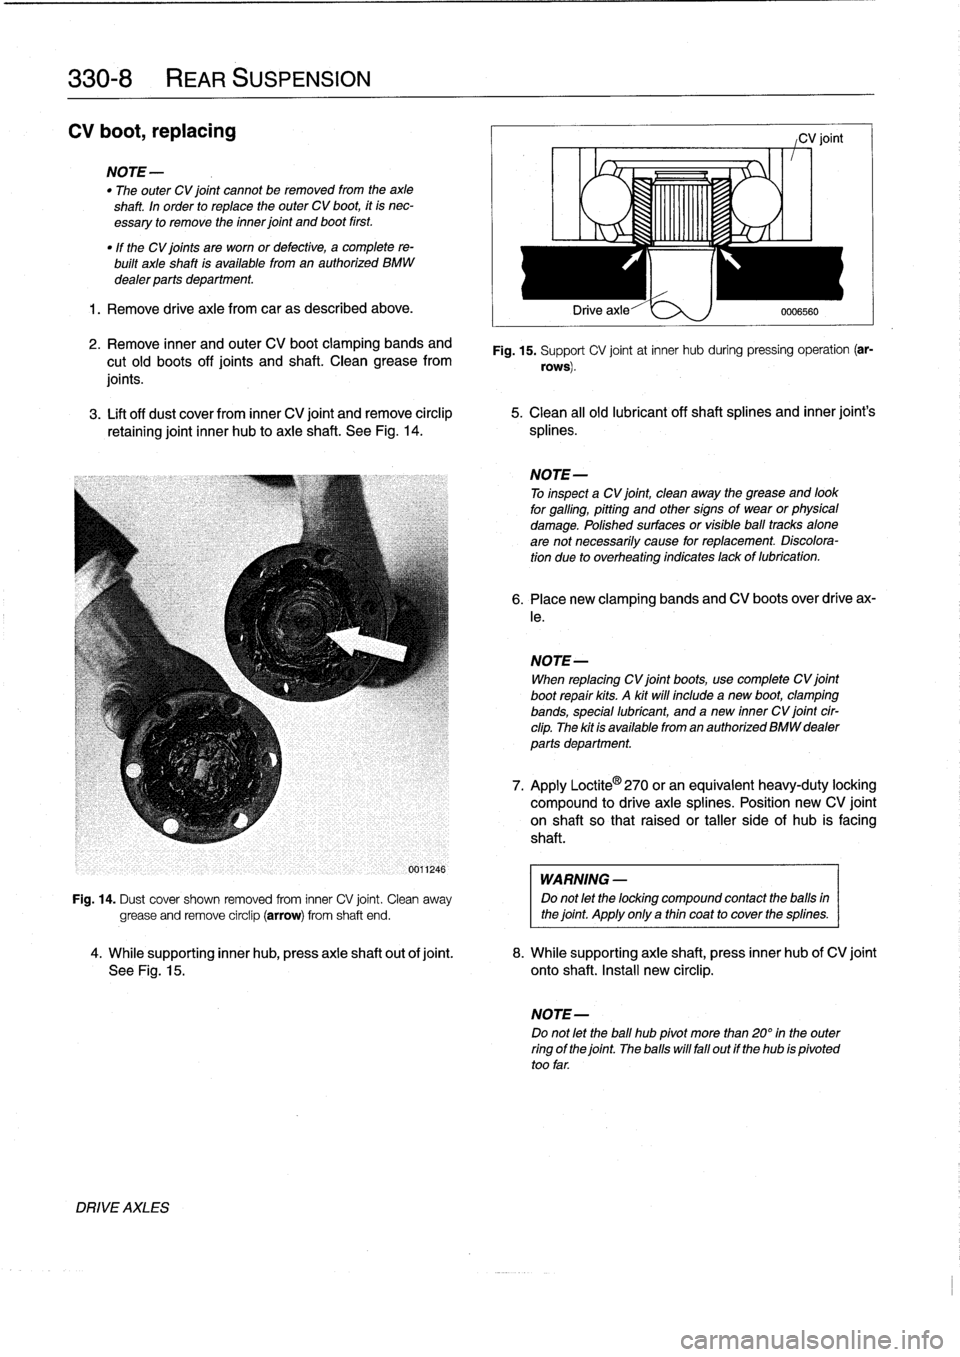 BMW 318i 1997 E36 Workshop Manual 
330-
8

	

REAR
SUSPENSION

CV
boot,
replacing

NOTE-

"
The
outer
CV
joint
cannot
be
removed
from
the
axle
shaft
.
In
order
to
replace
the
outer
CV
boot,
it
is
nec-
essary
to
remove
the
inner
joint
